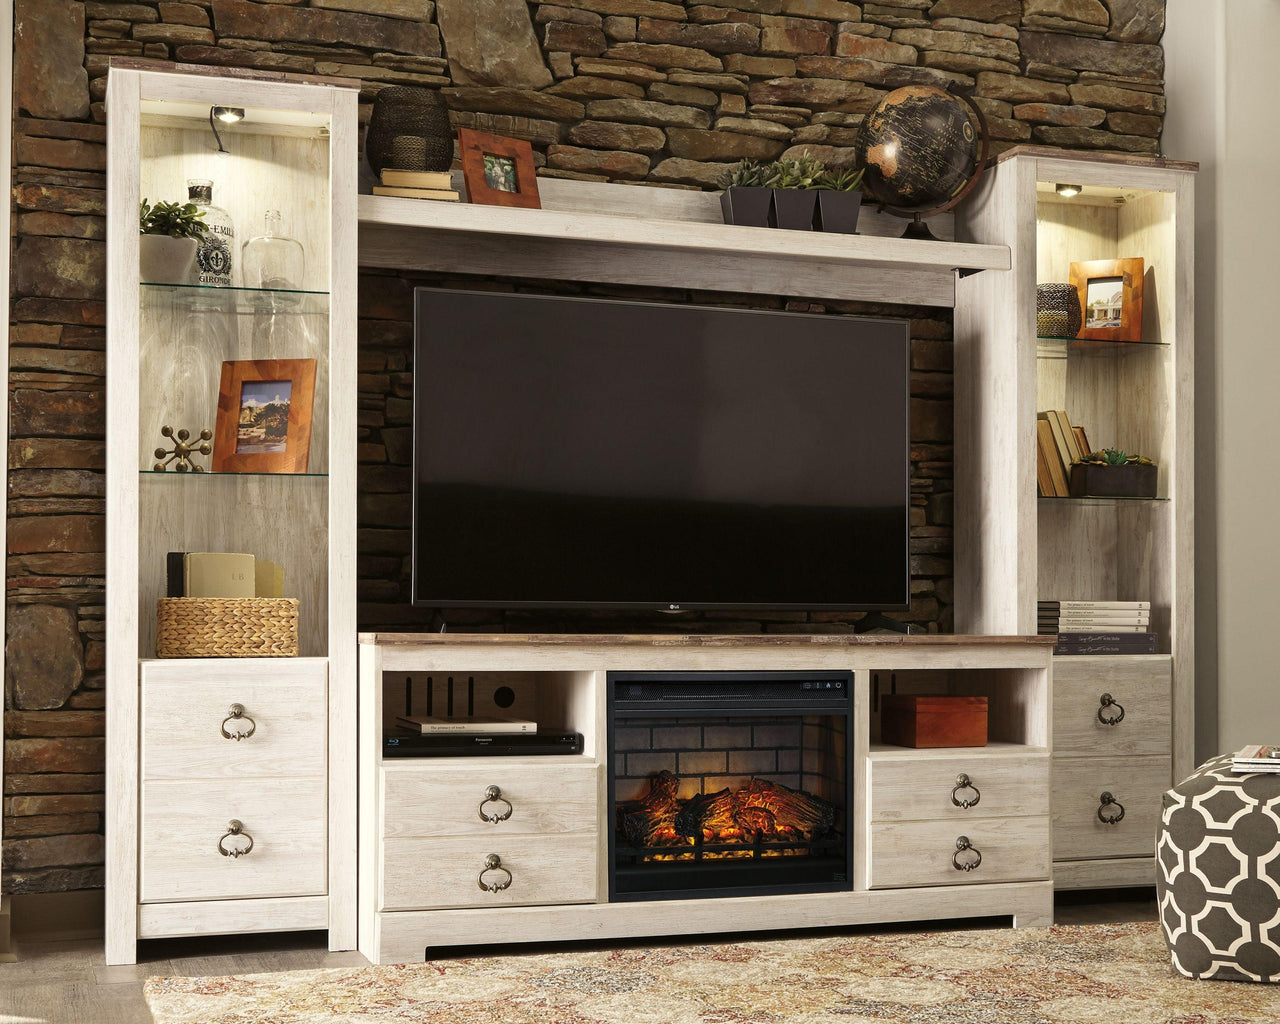 Willowton - Whitewash - Entertainment Center - TV Stand With Faux Firebrick Fireplace Insert Tony's Home Furnishings Furniture. Beds. Dressers. Sofas.